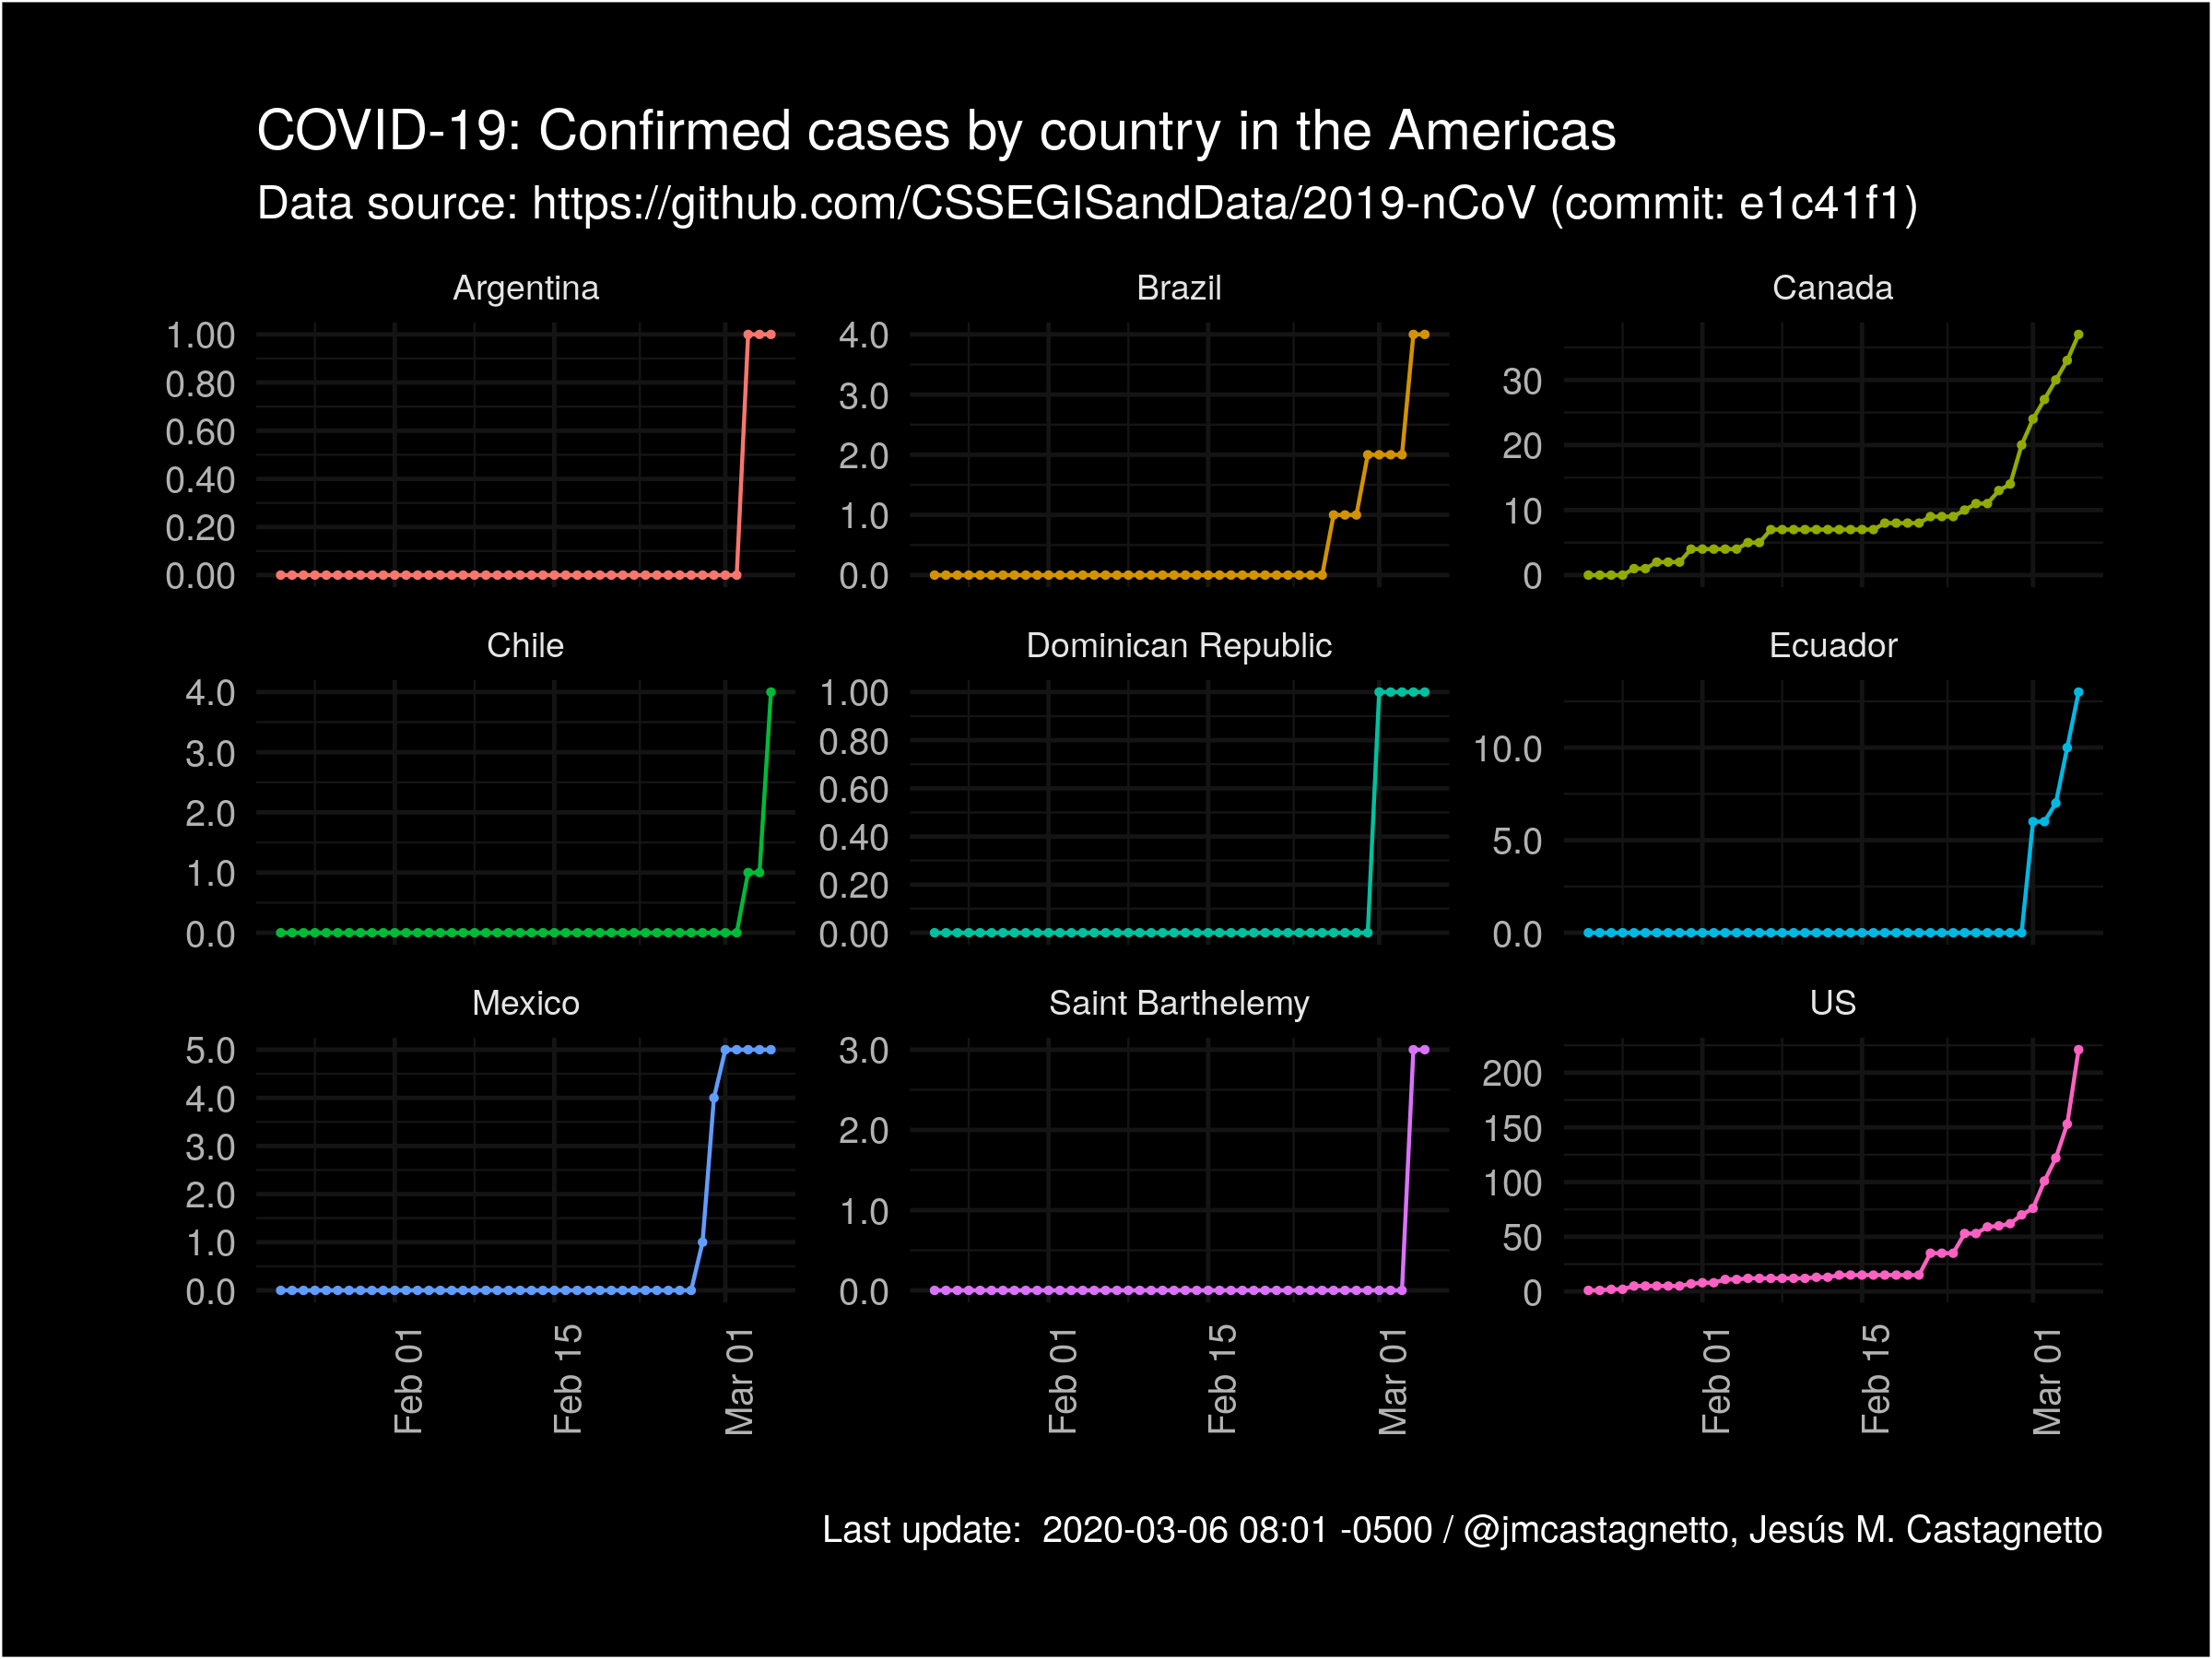 COVID-19 Confirmed cases by country (Americas)